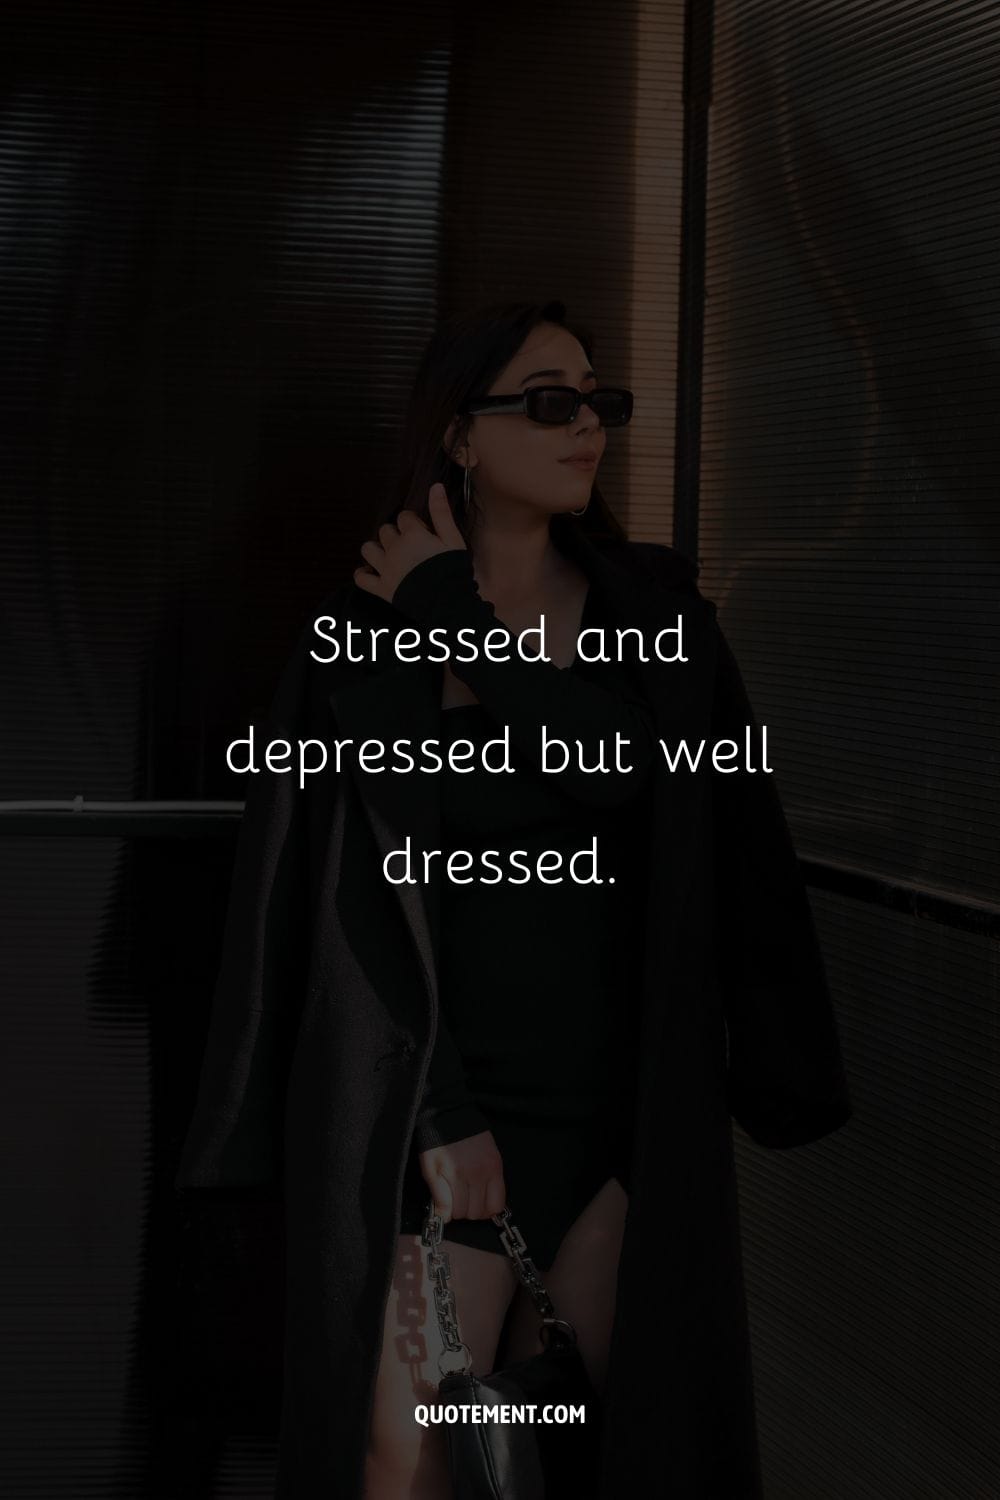 Stressed and depressed but well dressed.